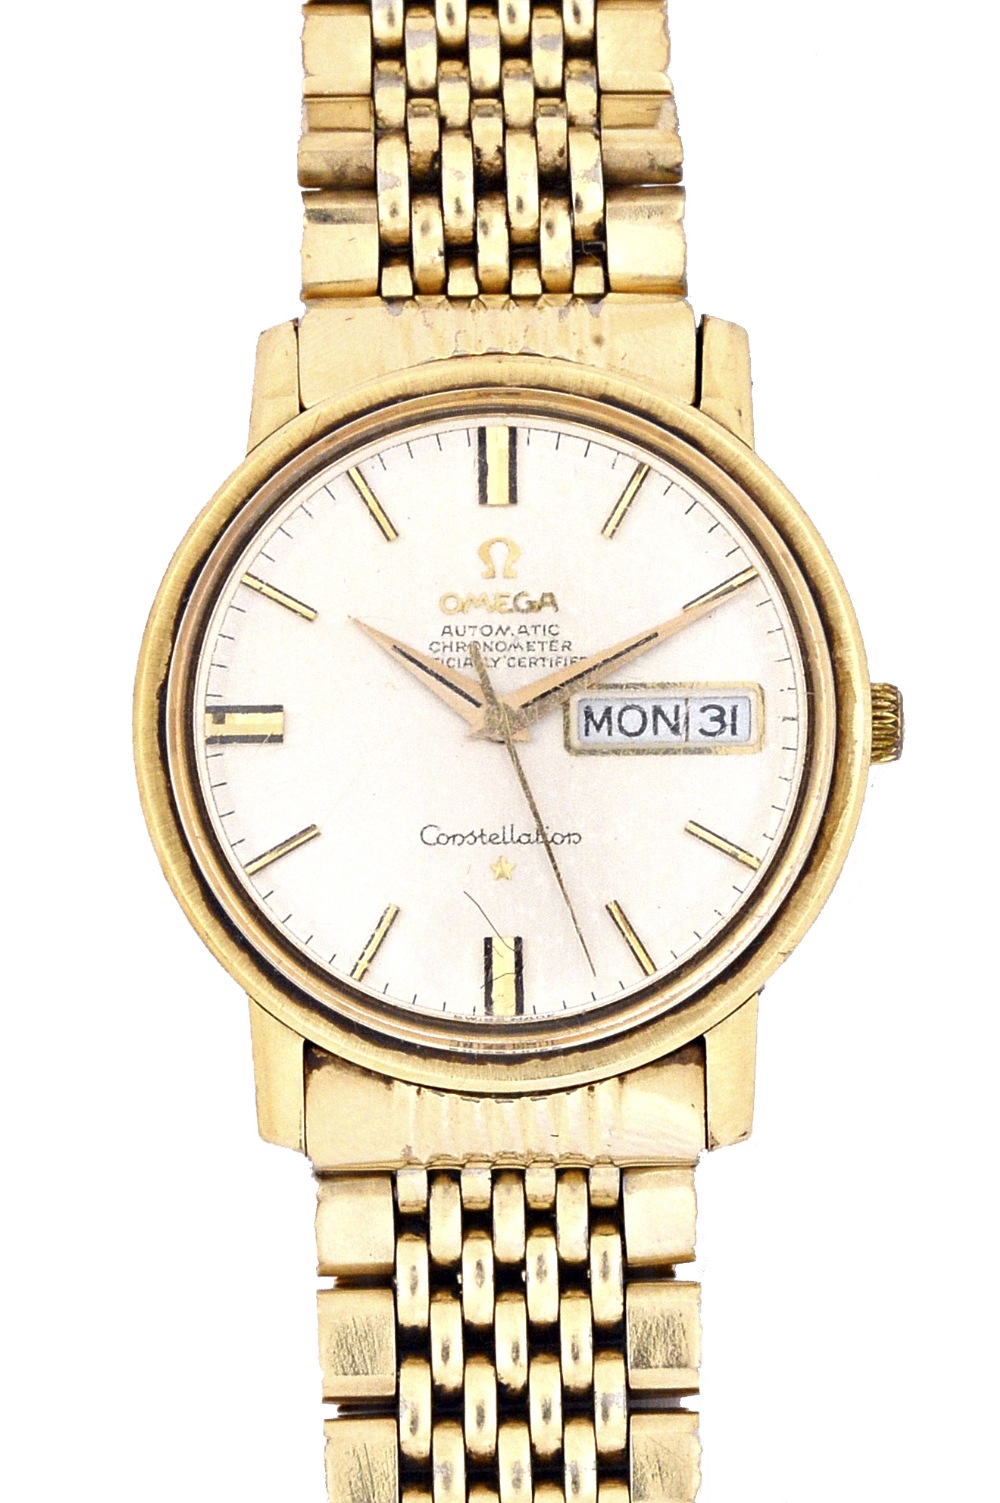 An Omega Constellation Automatic gilt metal fronted and steel backed gentleman's bracelet